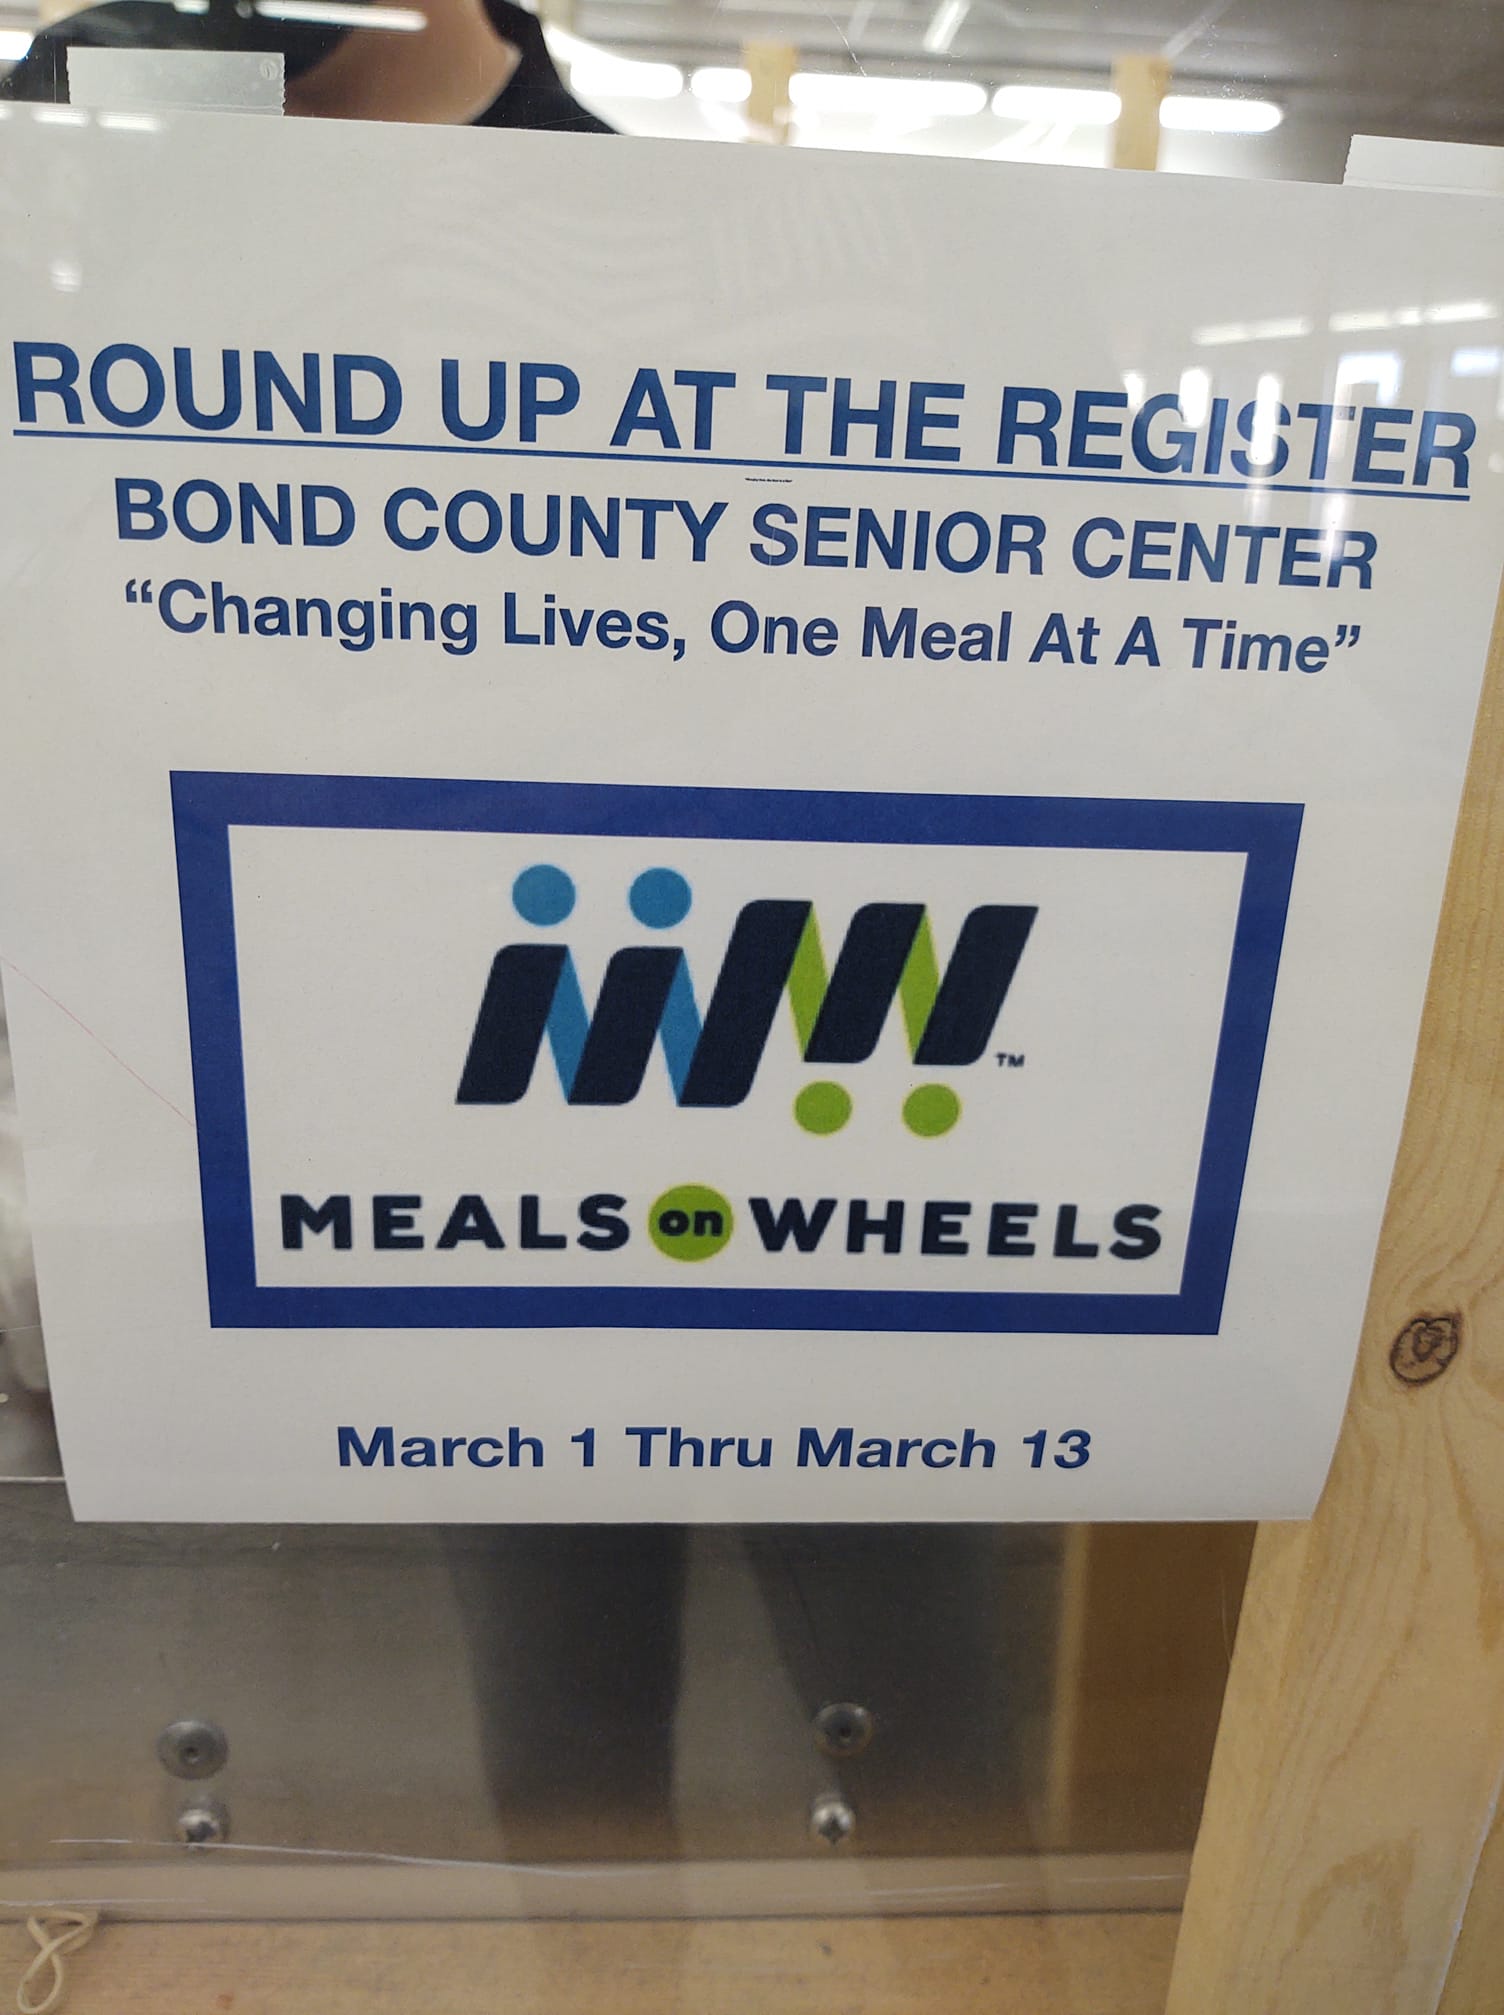 blue text and Meals on Wheels program logo inviting shoppers to round up at the register.